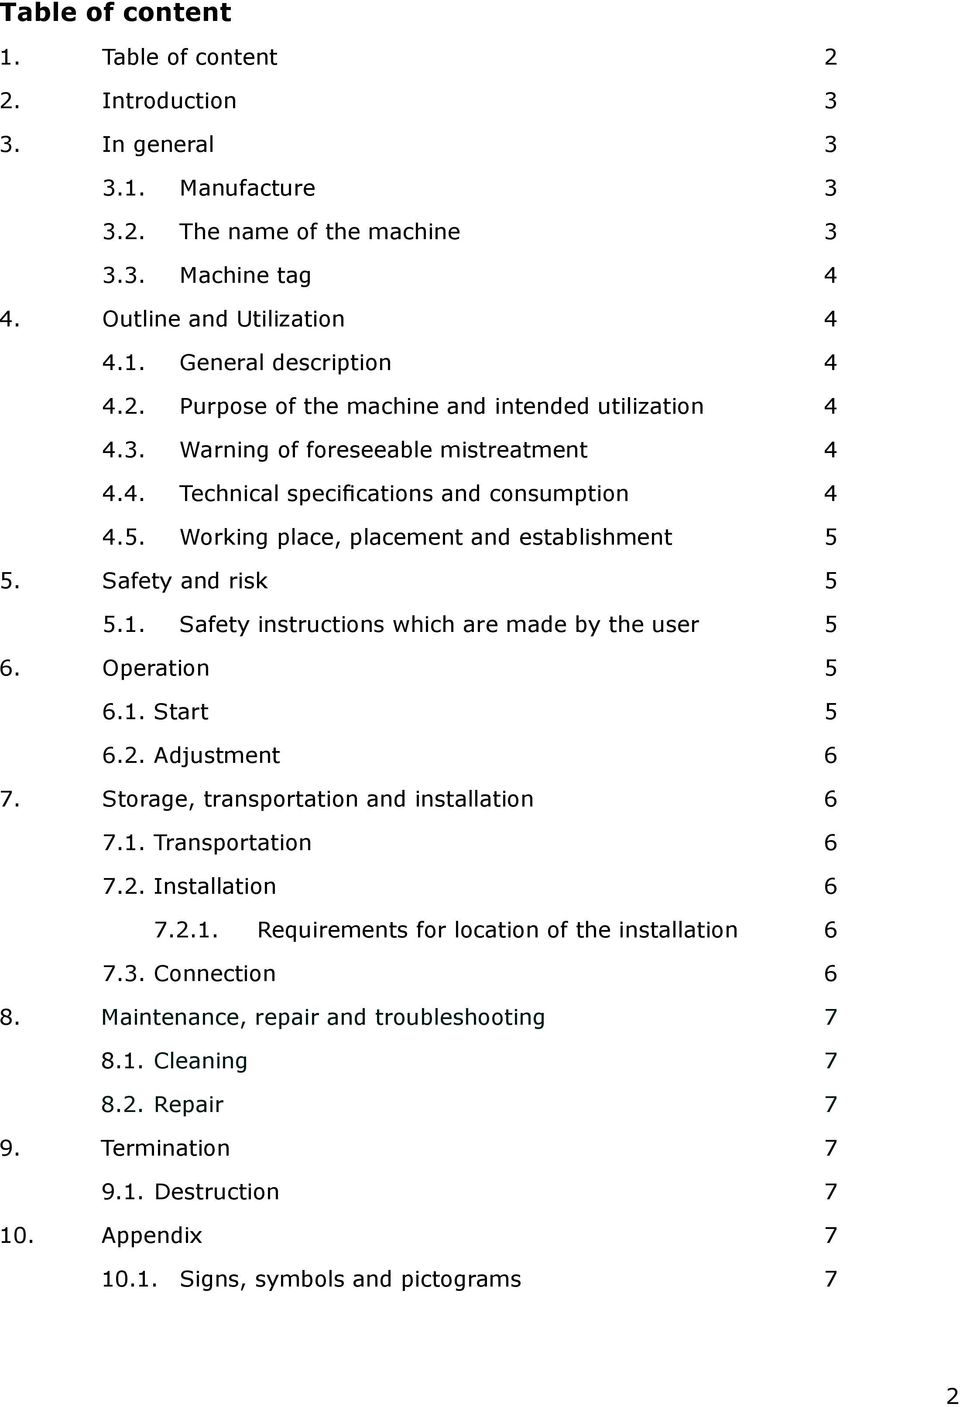 Safety and risk 5 5.1. Safety instructions which are made by the user 5 6. Operation 5 6.1. Start 5 6.2. Adjustment 6 7. Storage, transportation and installation 6 7.1. Transportation 6 7.2. Installation 6 7.